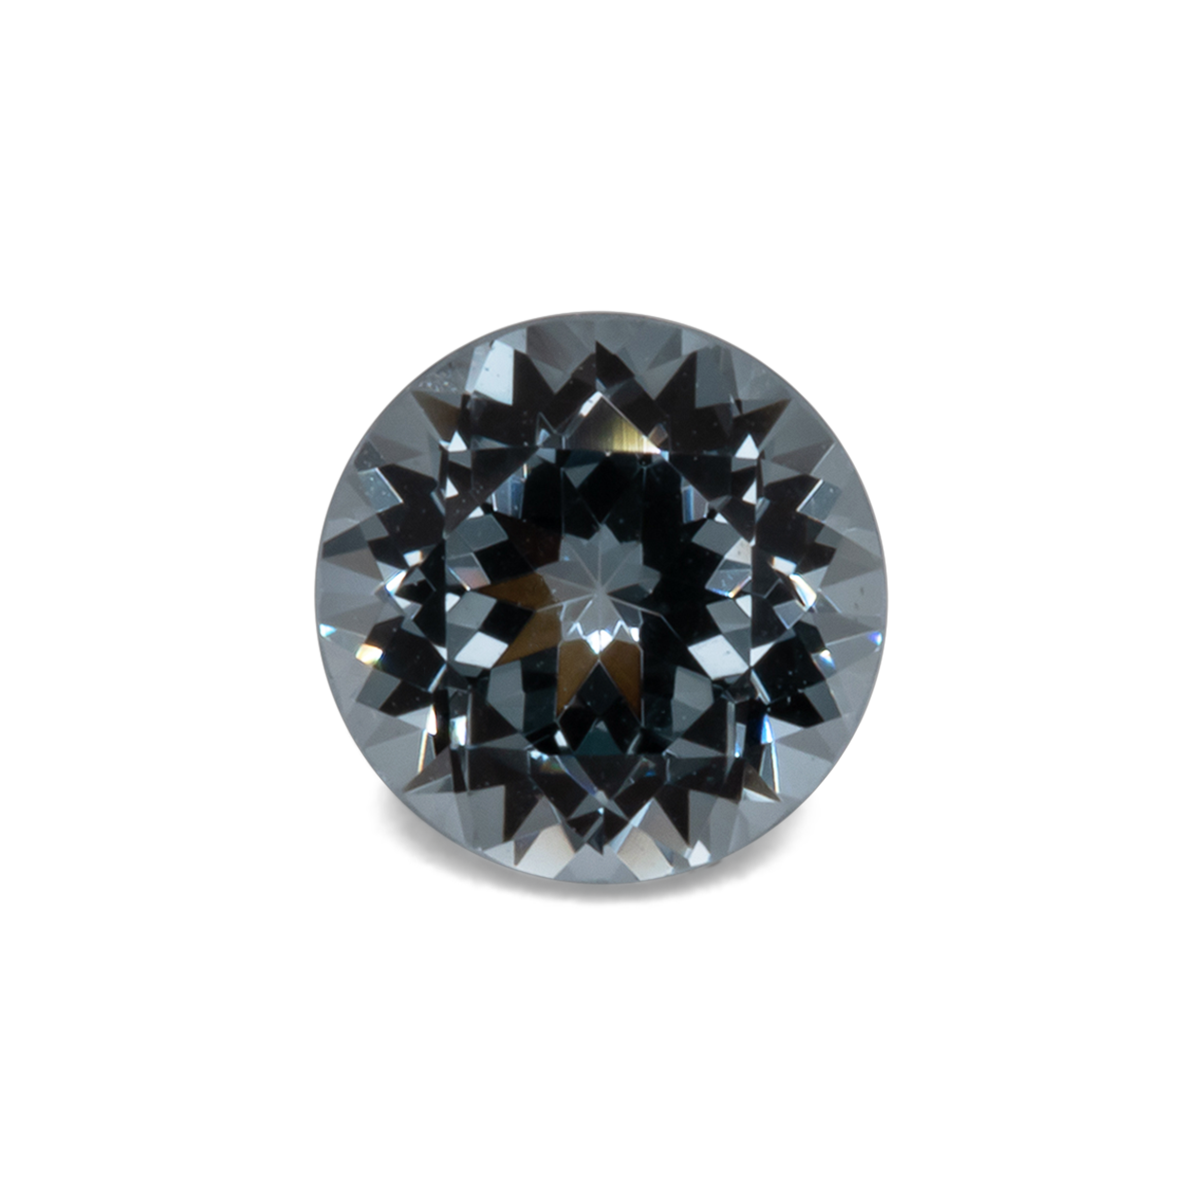 Spinel - blue/grey, round, 5.1x5.1 mm, 0.57 cts, No. SP90012